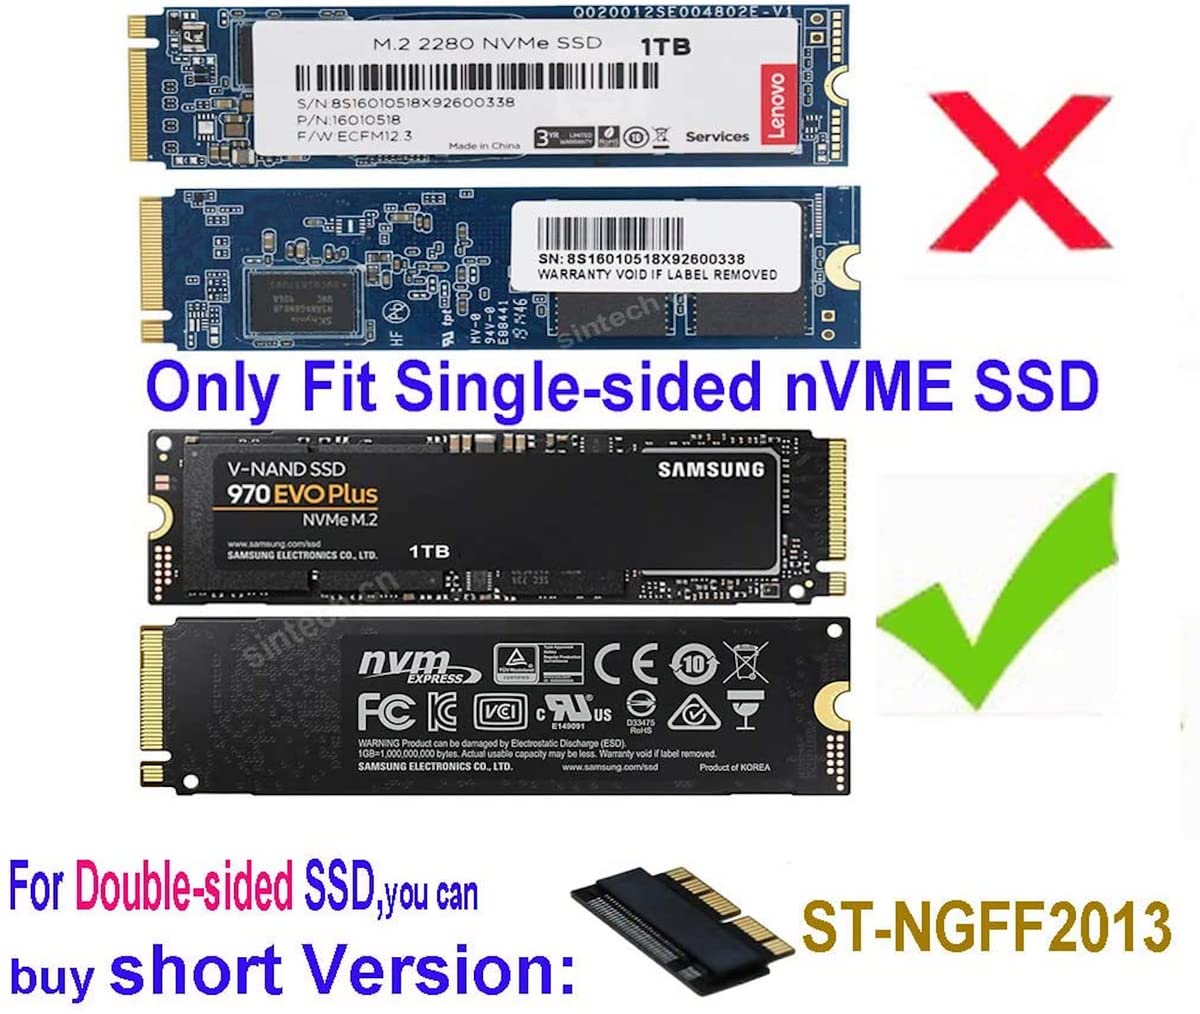 Sintech M.2 nVME SSD Adapter Card Upgrade Kits,Compatible for MacBook Air(2013-2017 Year) and MacBook PRO（Late 2013-2015 Year,iMac